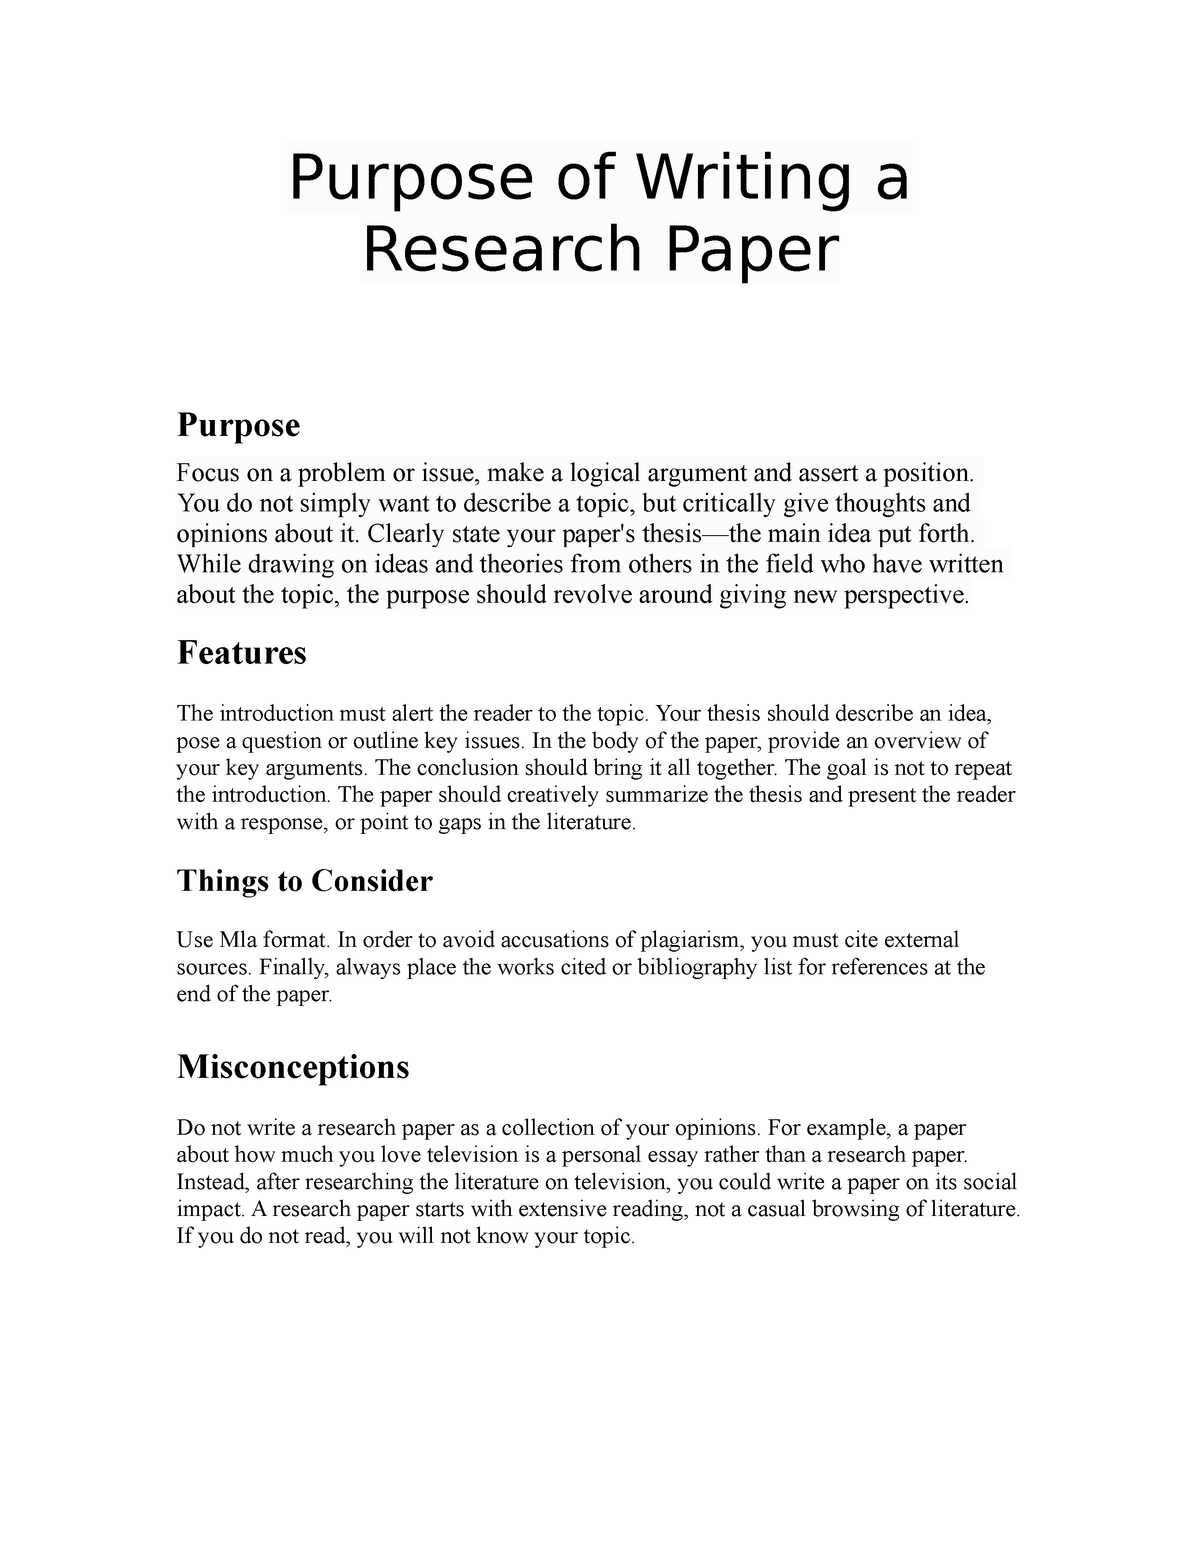 what purpose of a research paper